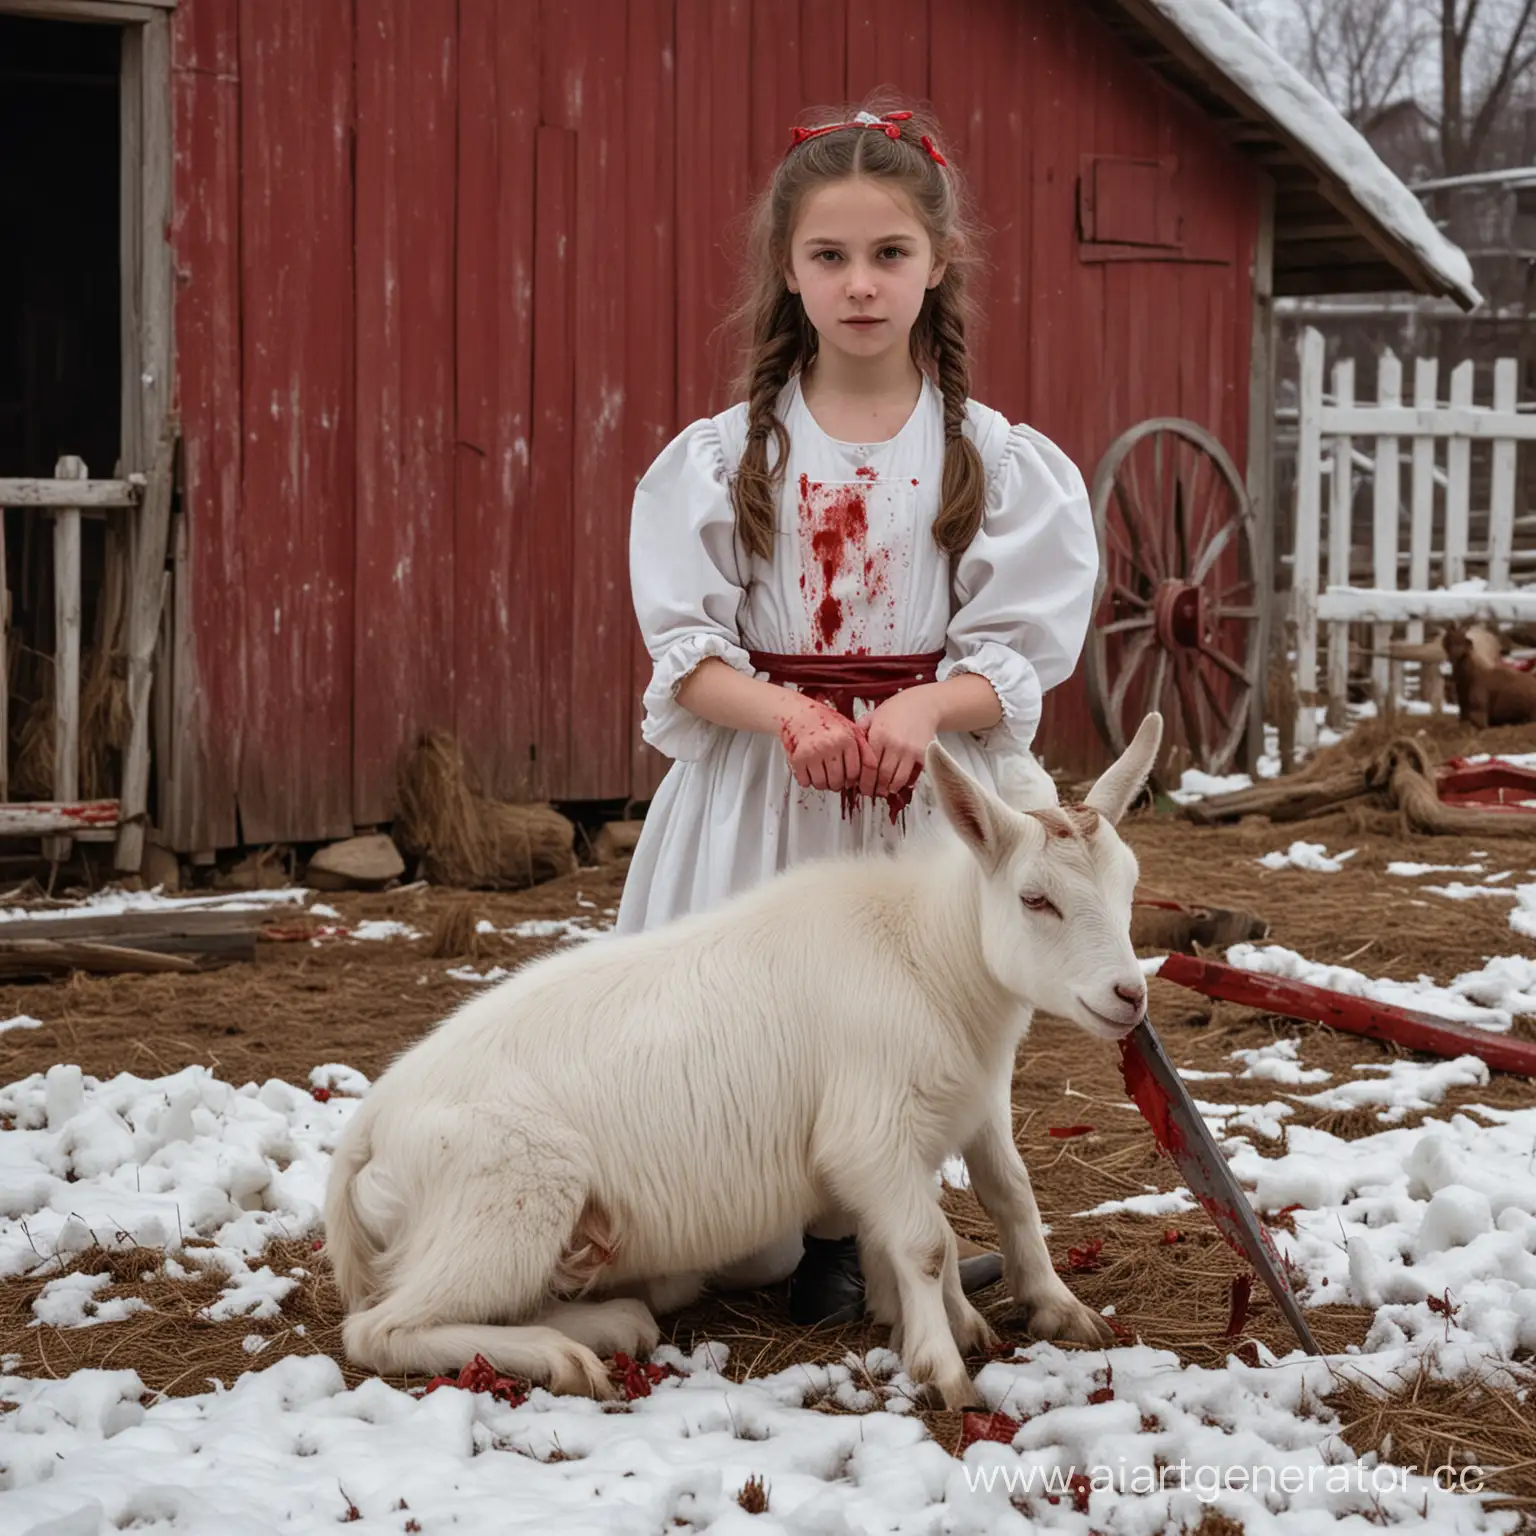 Young-Girl-with-Bloodied-Knife-and-SnowWhite-Goat-by-Red-Barn